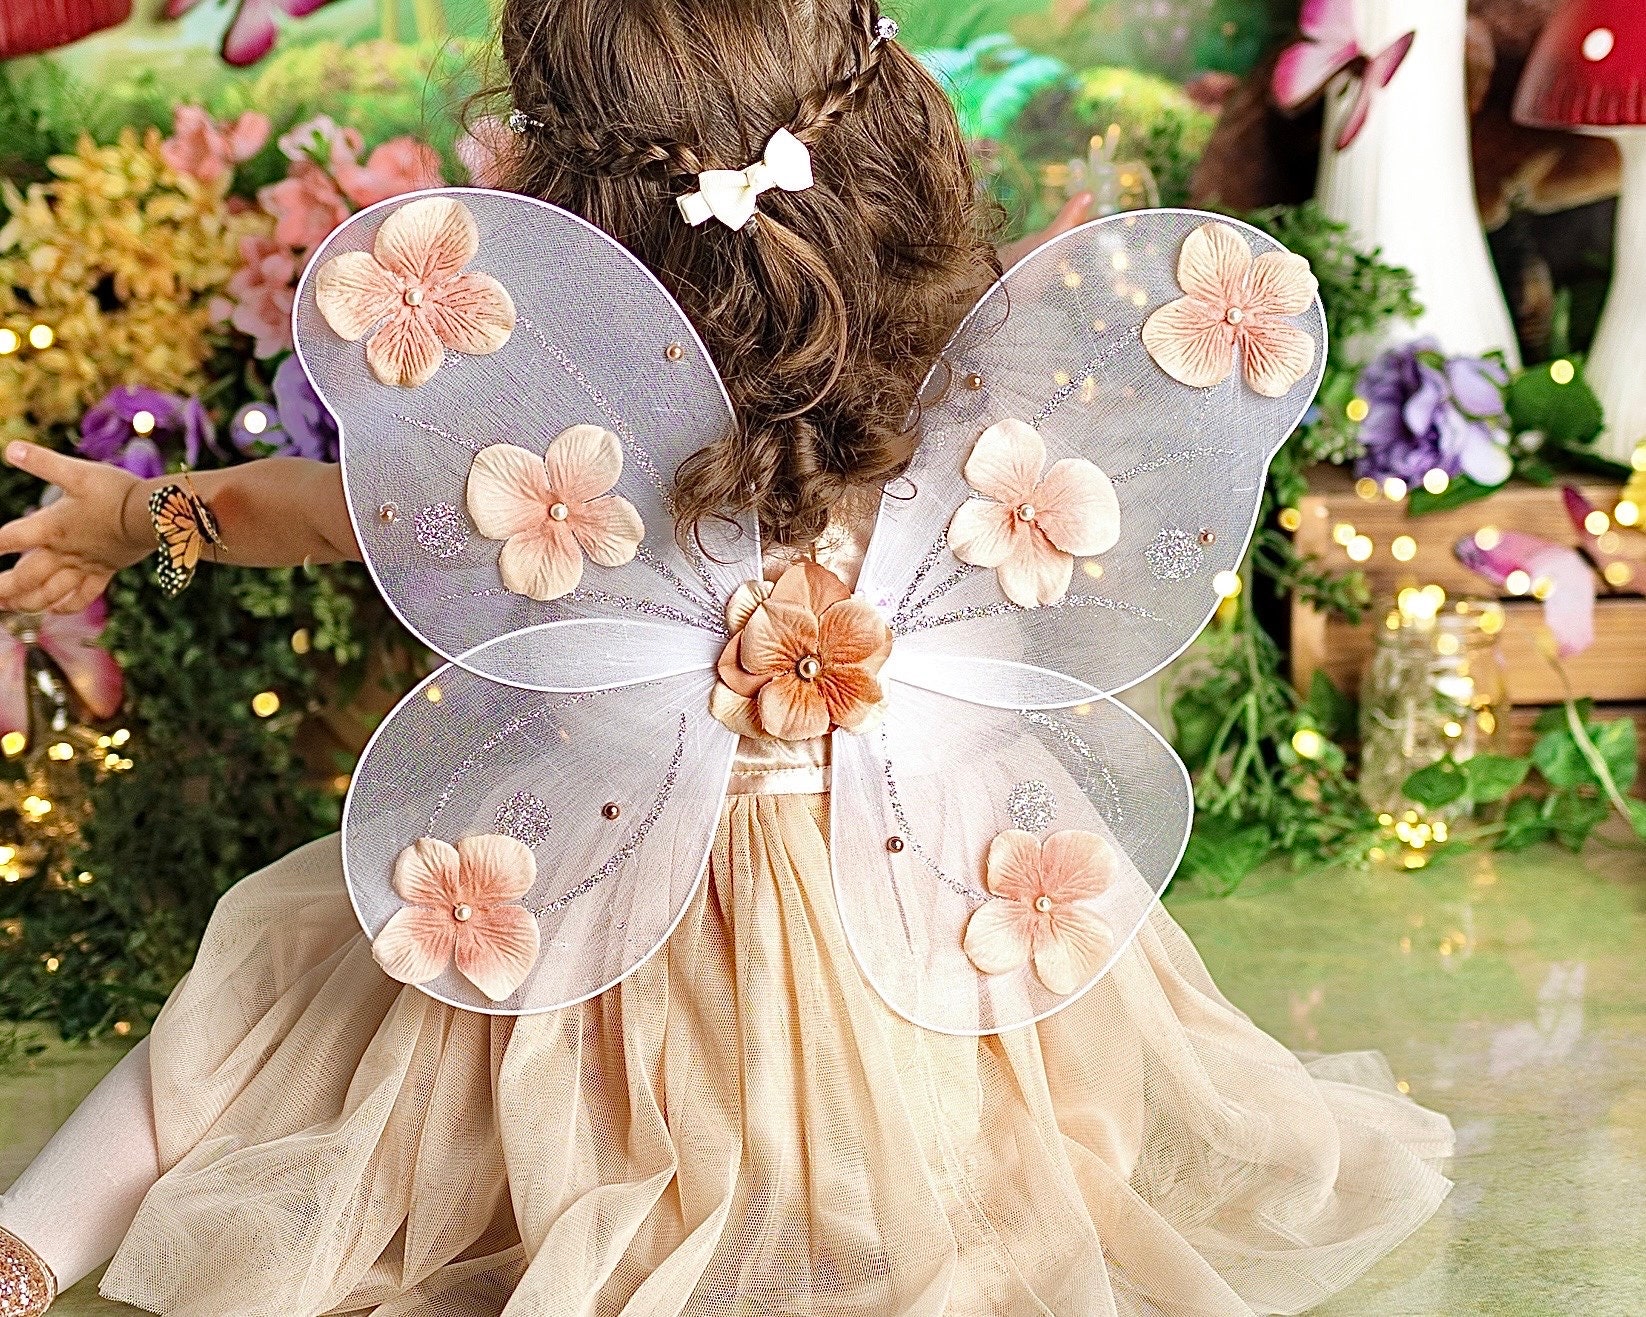 Green Fairy Wings - Fairy Costume Accessories for Women - Funcredible